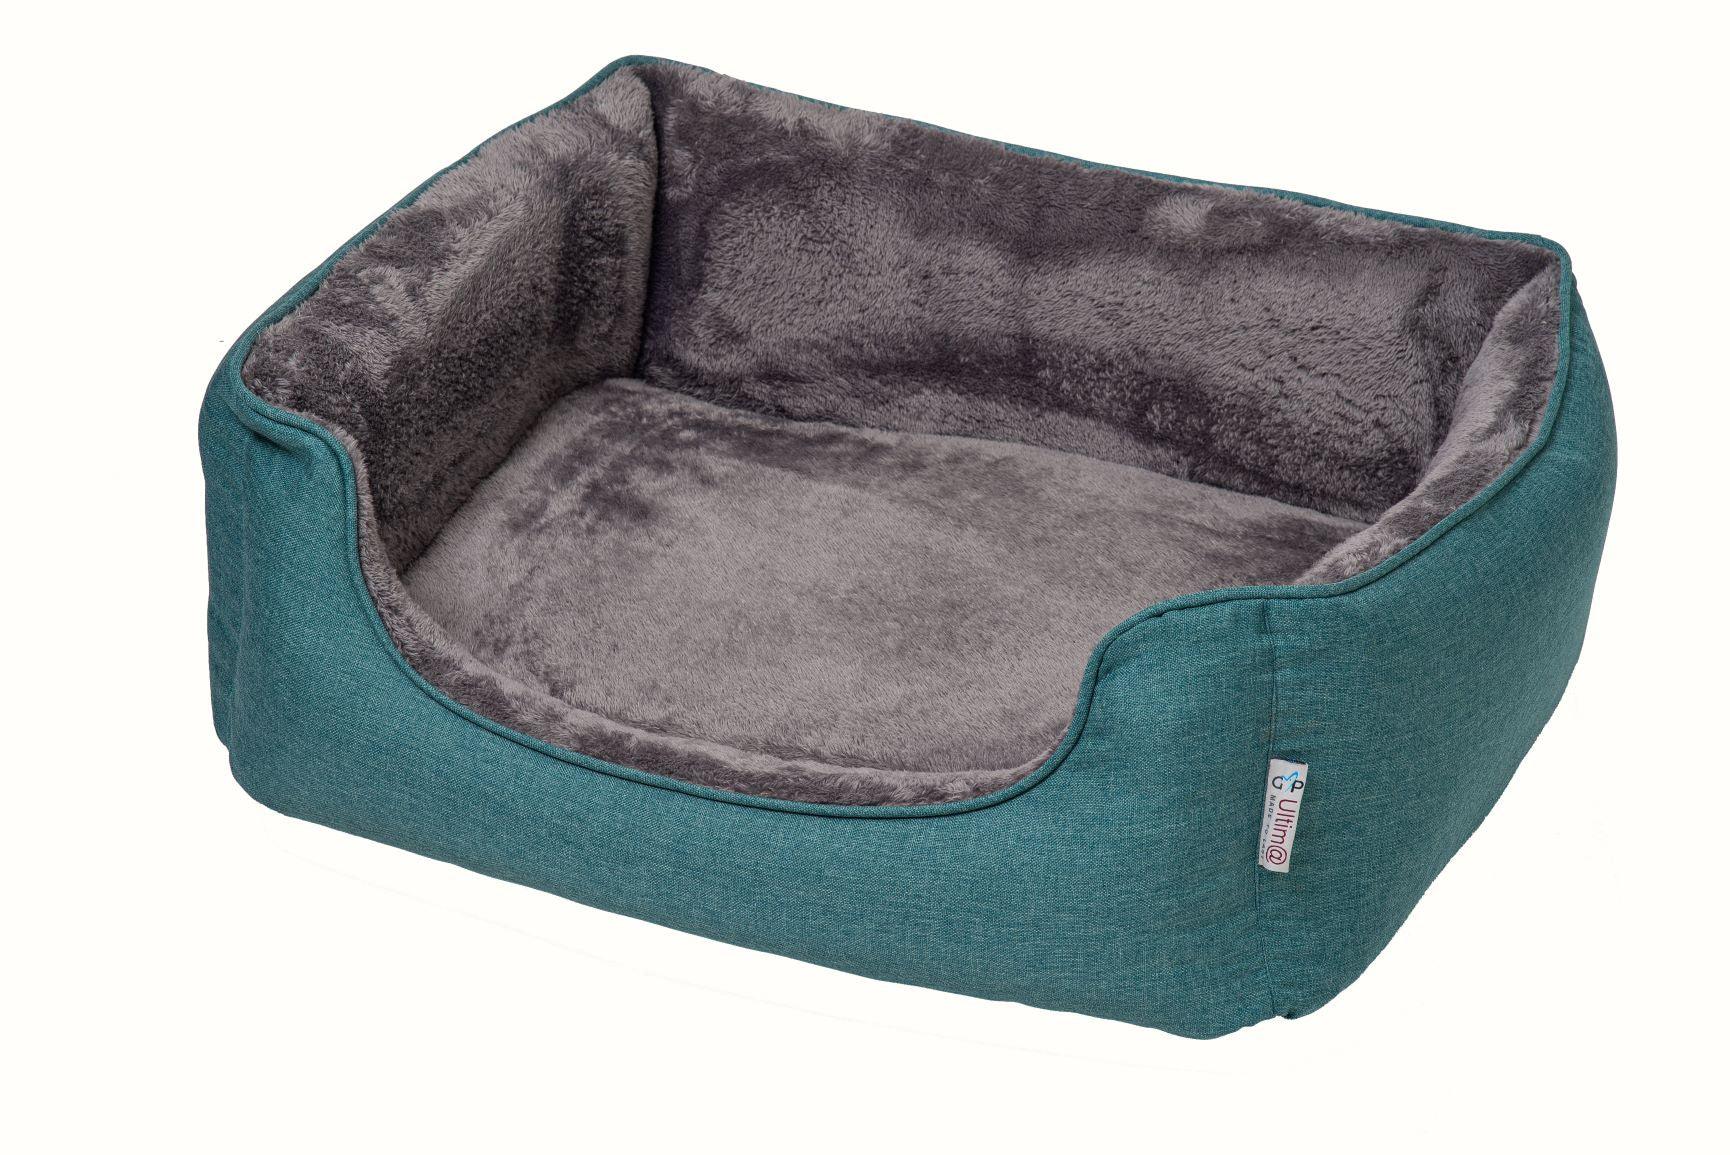 Ultima Bed Cover Water Resistent Teal Dog Beds 